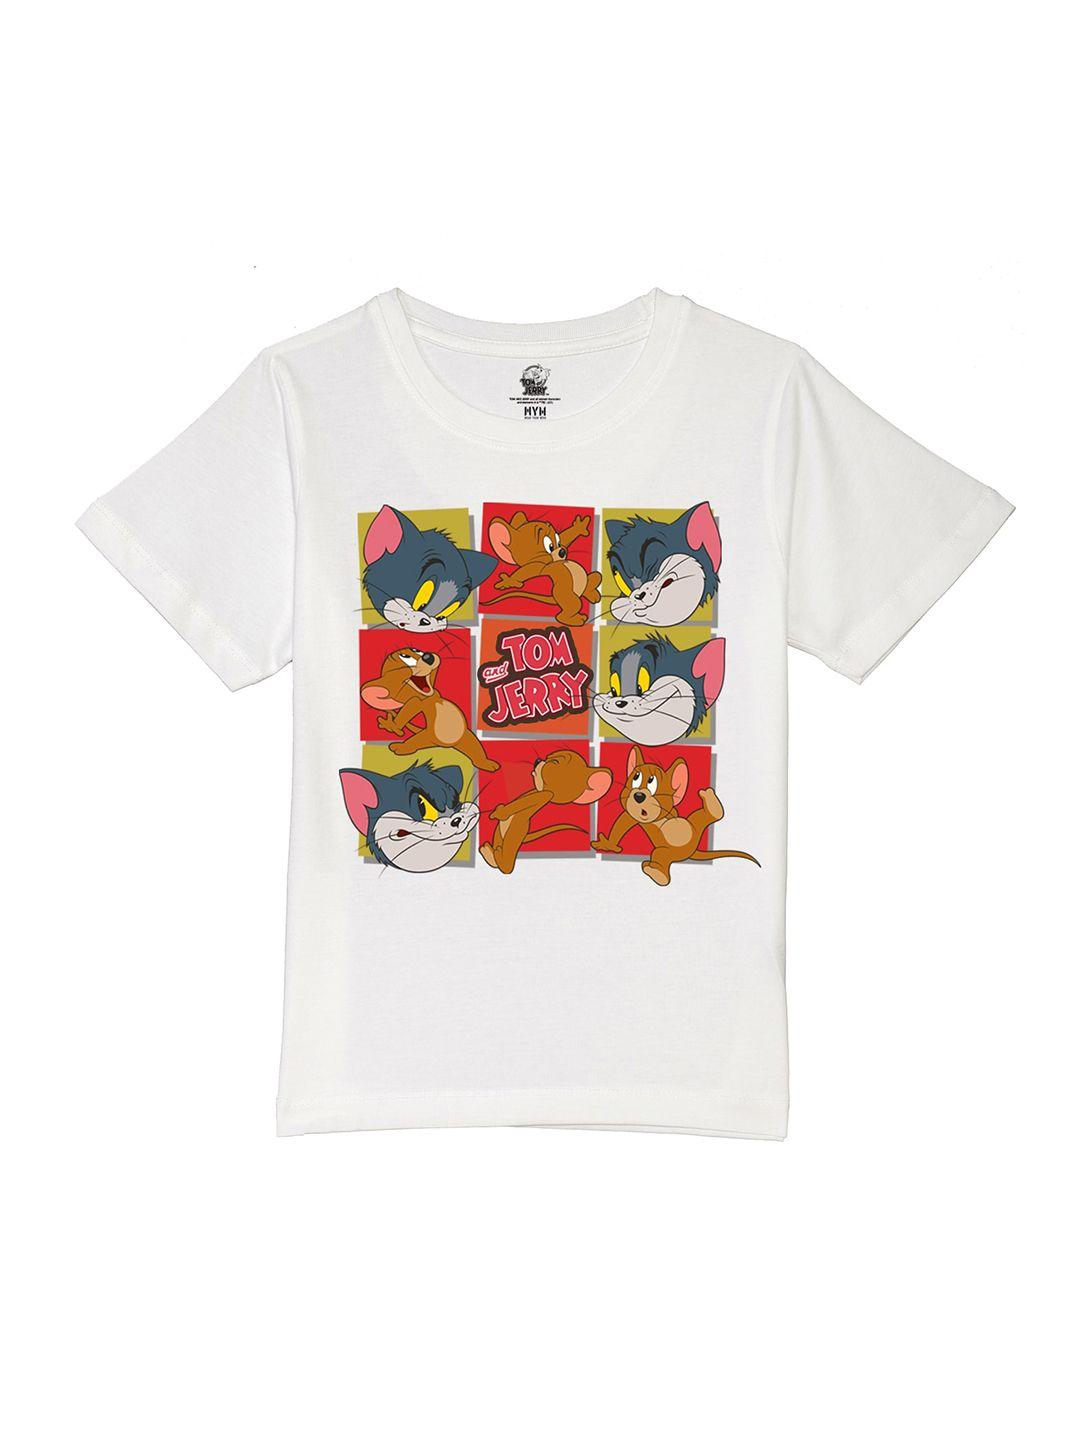 wear-your-mind-boys-white-printed-applique-t-shirt